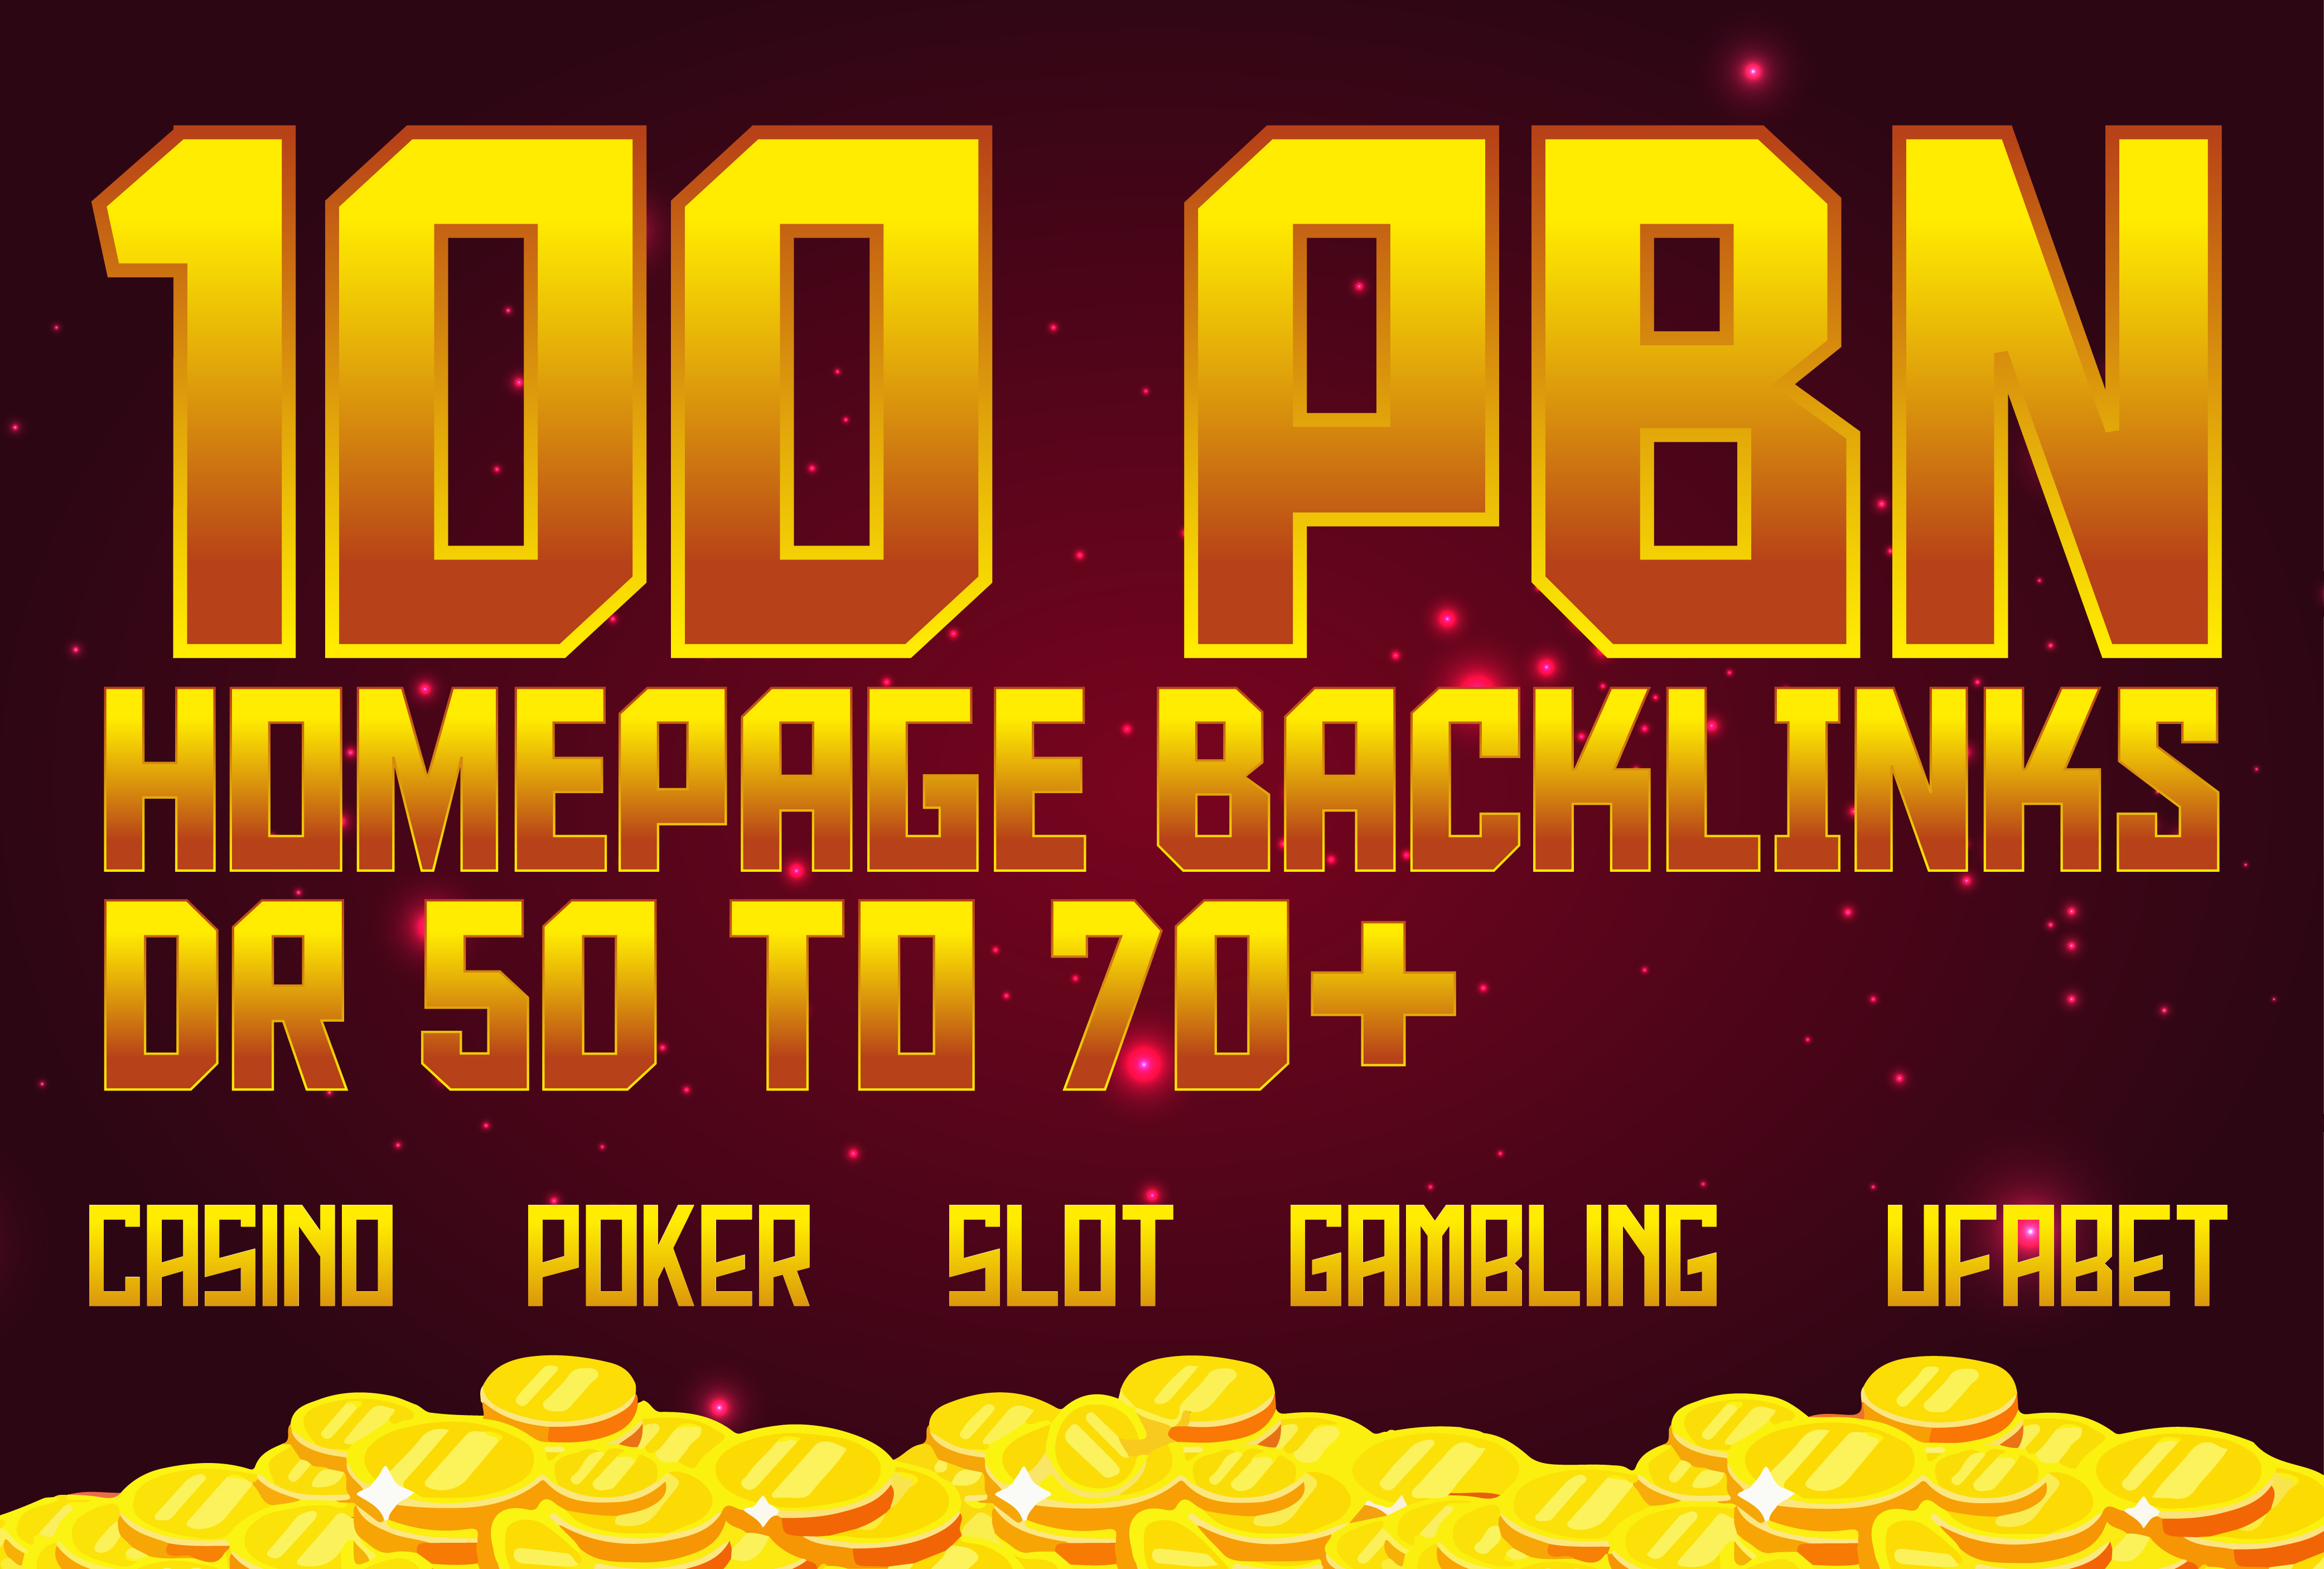 Get 100 Gambling/Casino/Poker PBN DR 50 to 70 High Quality Permanent Homepage Backlinks